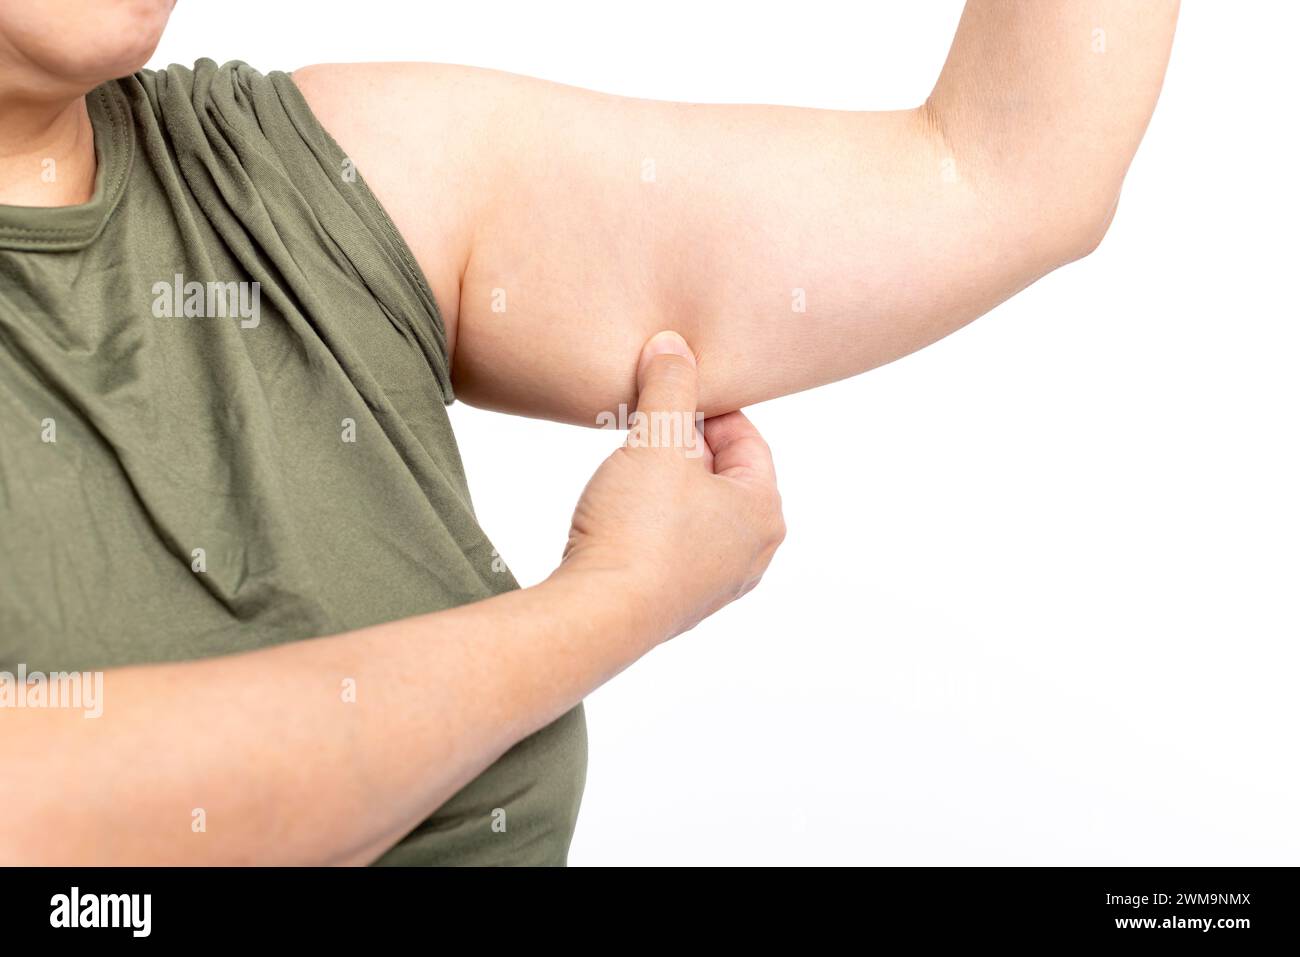 Woman checking her upper arm and excess fat Stock Photo